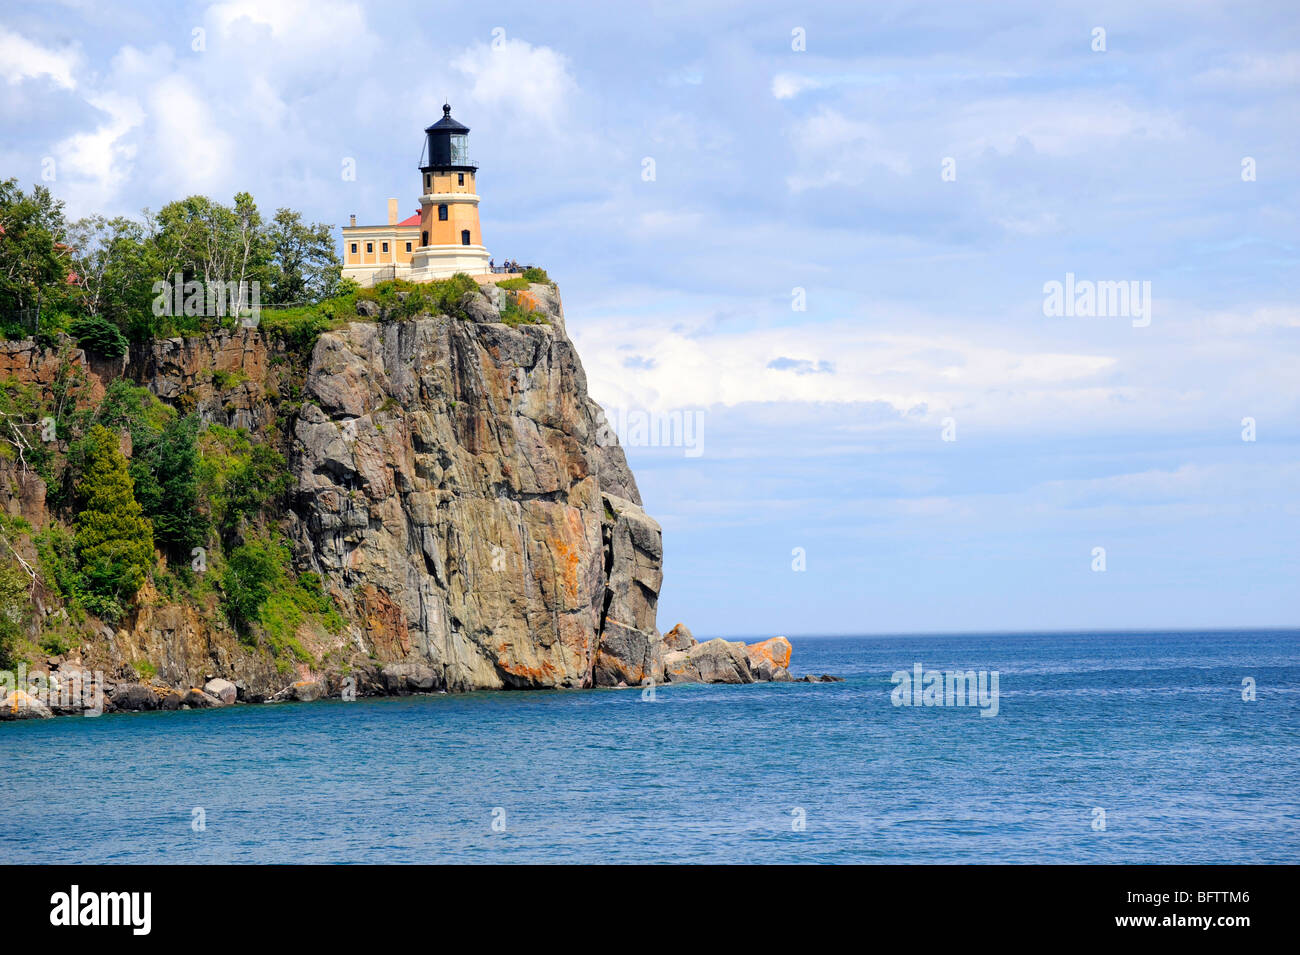 Image result for photos of split rock lighthouse on lake superior